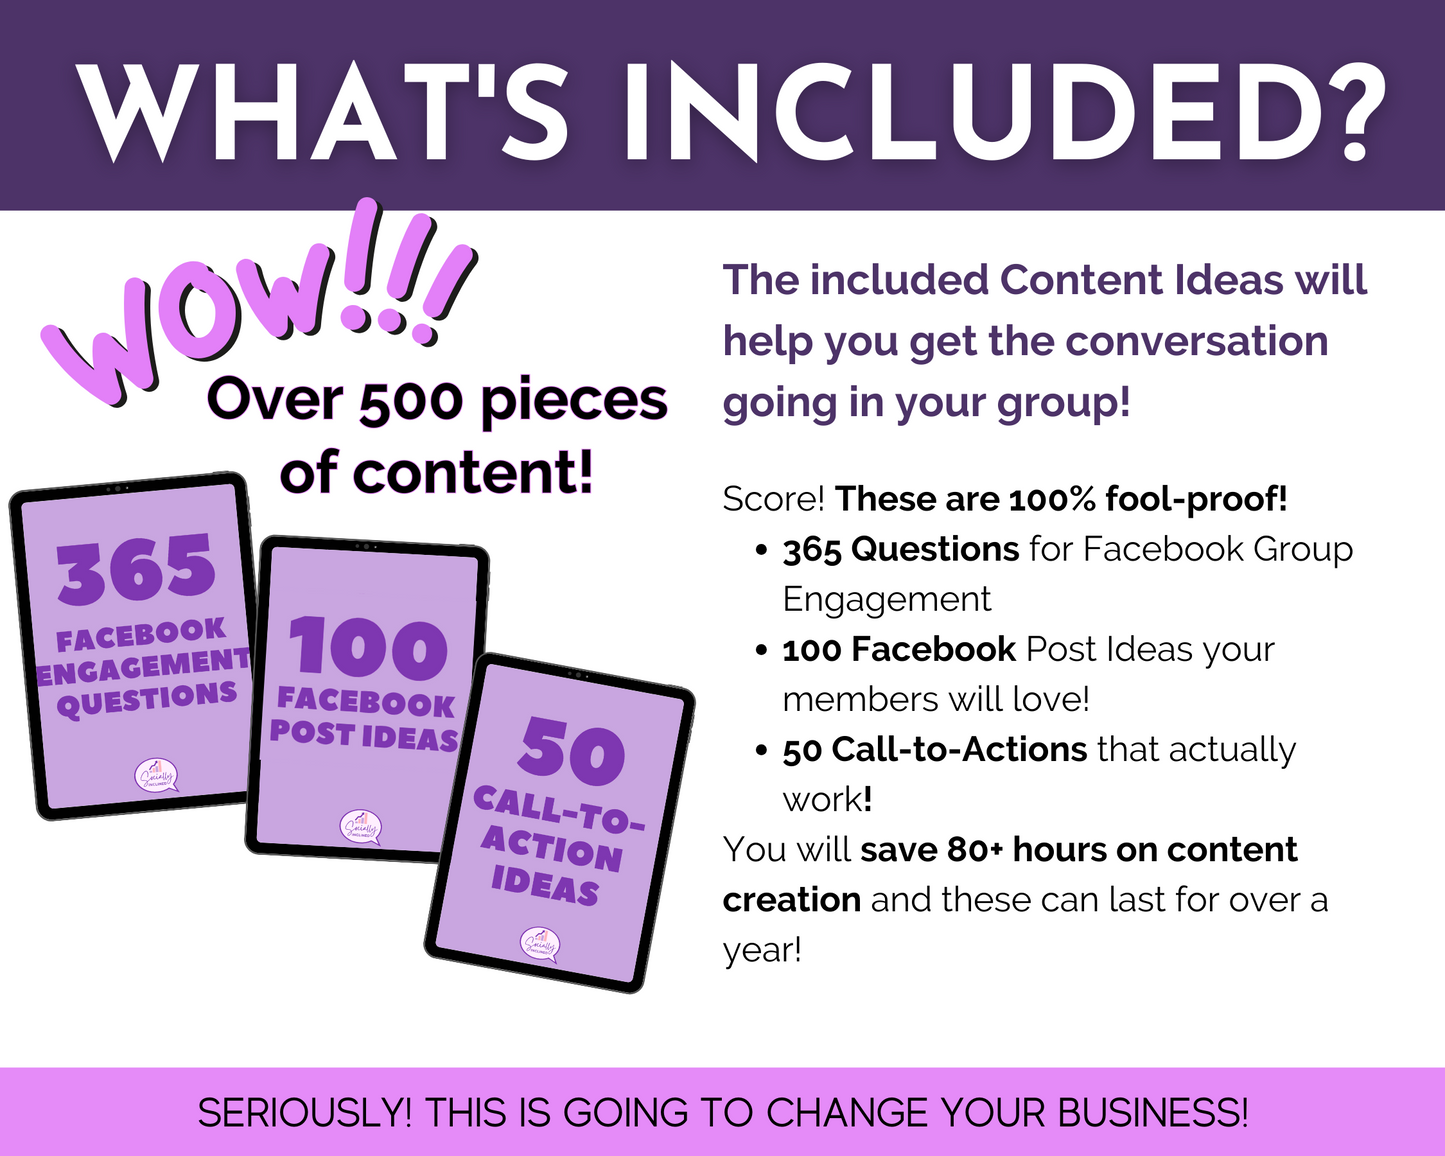 What's included in this package is a comprehensive guide to Monetization strategies for Facebook Group Growth, The ULTIMATE Grow & Monetize Your Facebook Group Bundle by Get Socially Inclined.